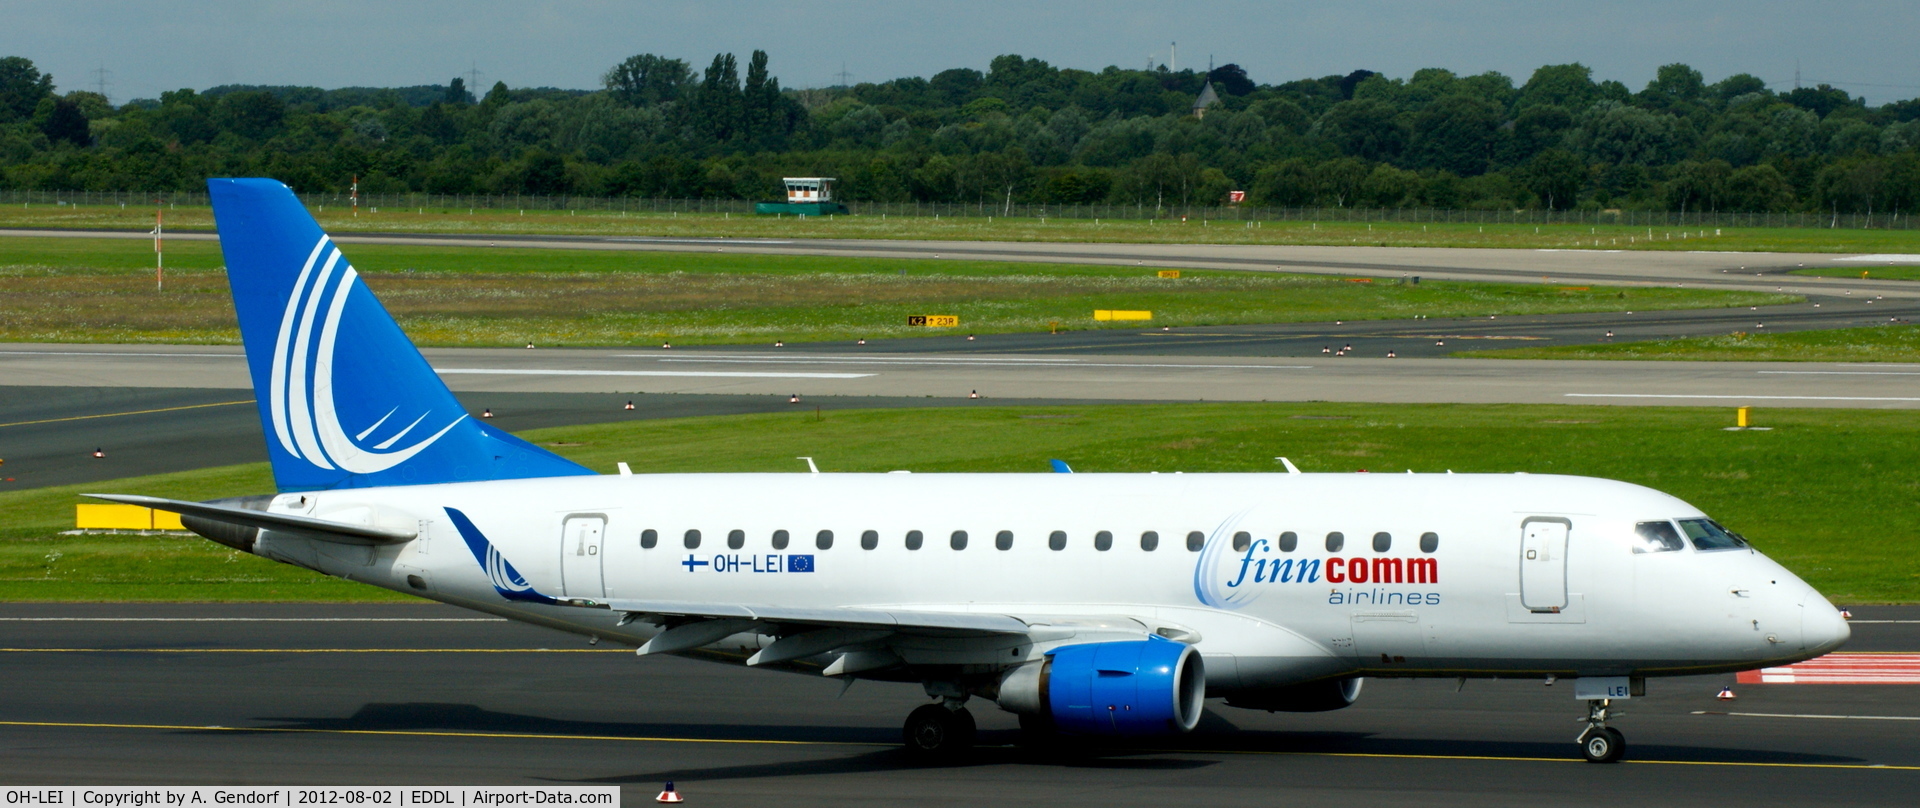 OH-LEI, 2006 Embraer 170LR (ERJ-170-100LR) C/N 17000120, Finncomm Airlines, is taxiing for departure at Düsseldorf Int´l (EDDL)